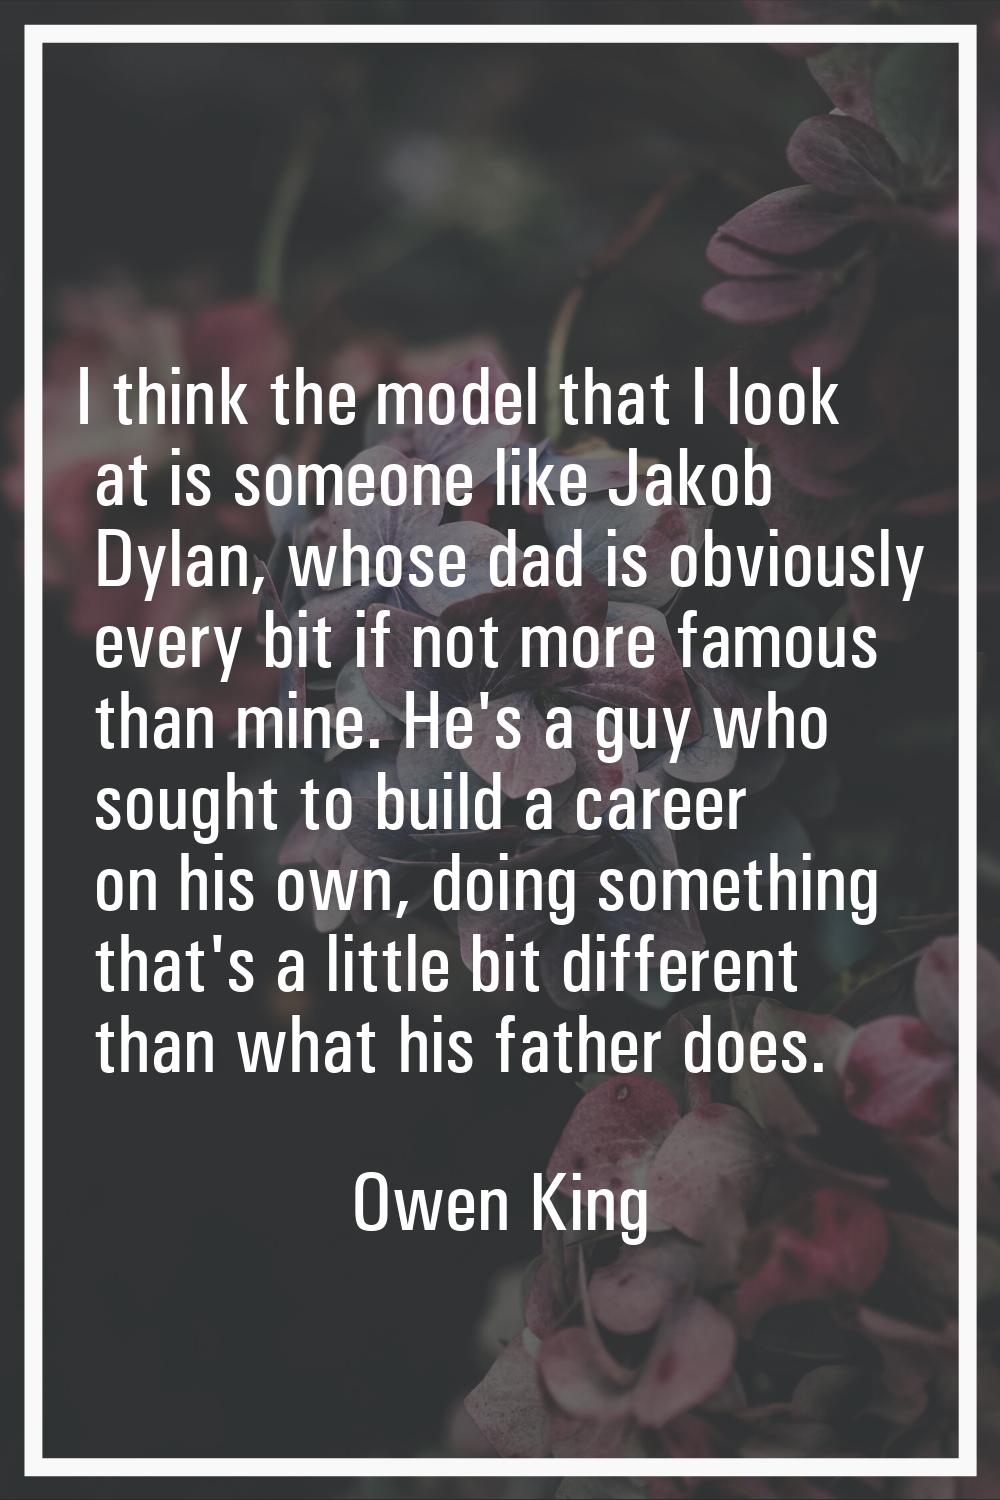 I think the model that I look at is someone like Jakob Dylan, whose dad is obviously every bit if n